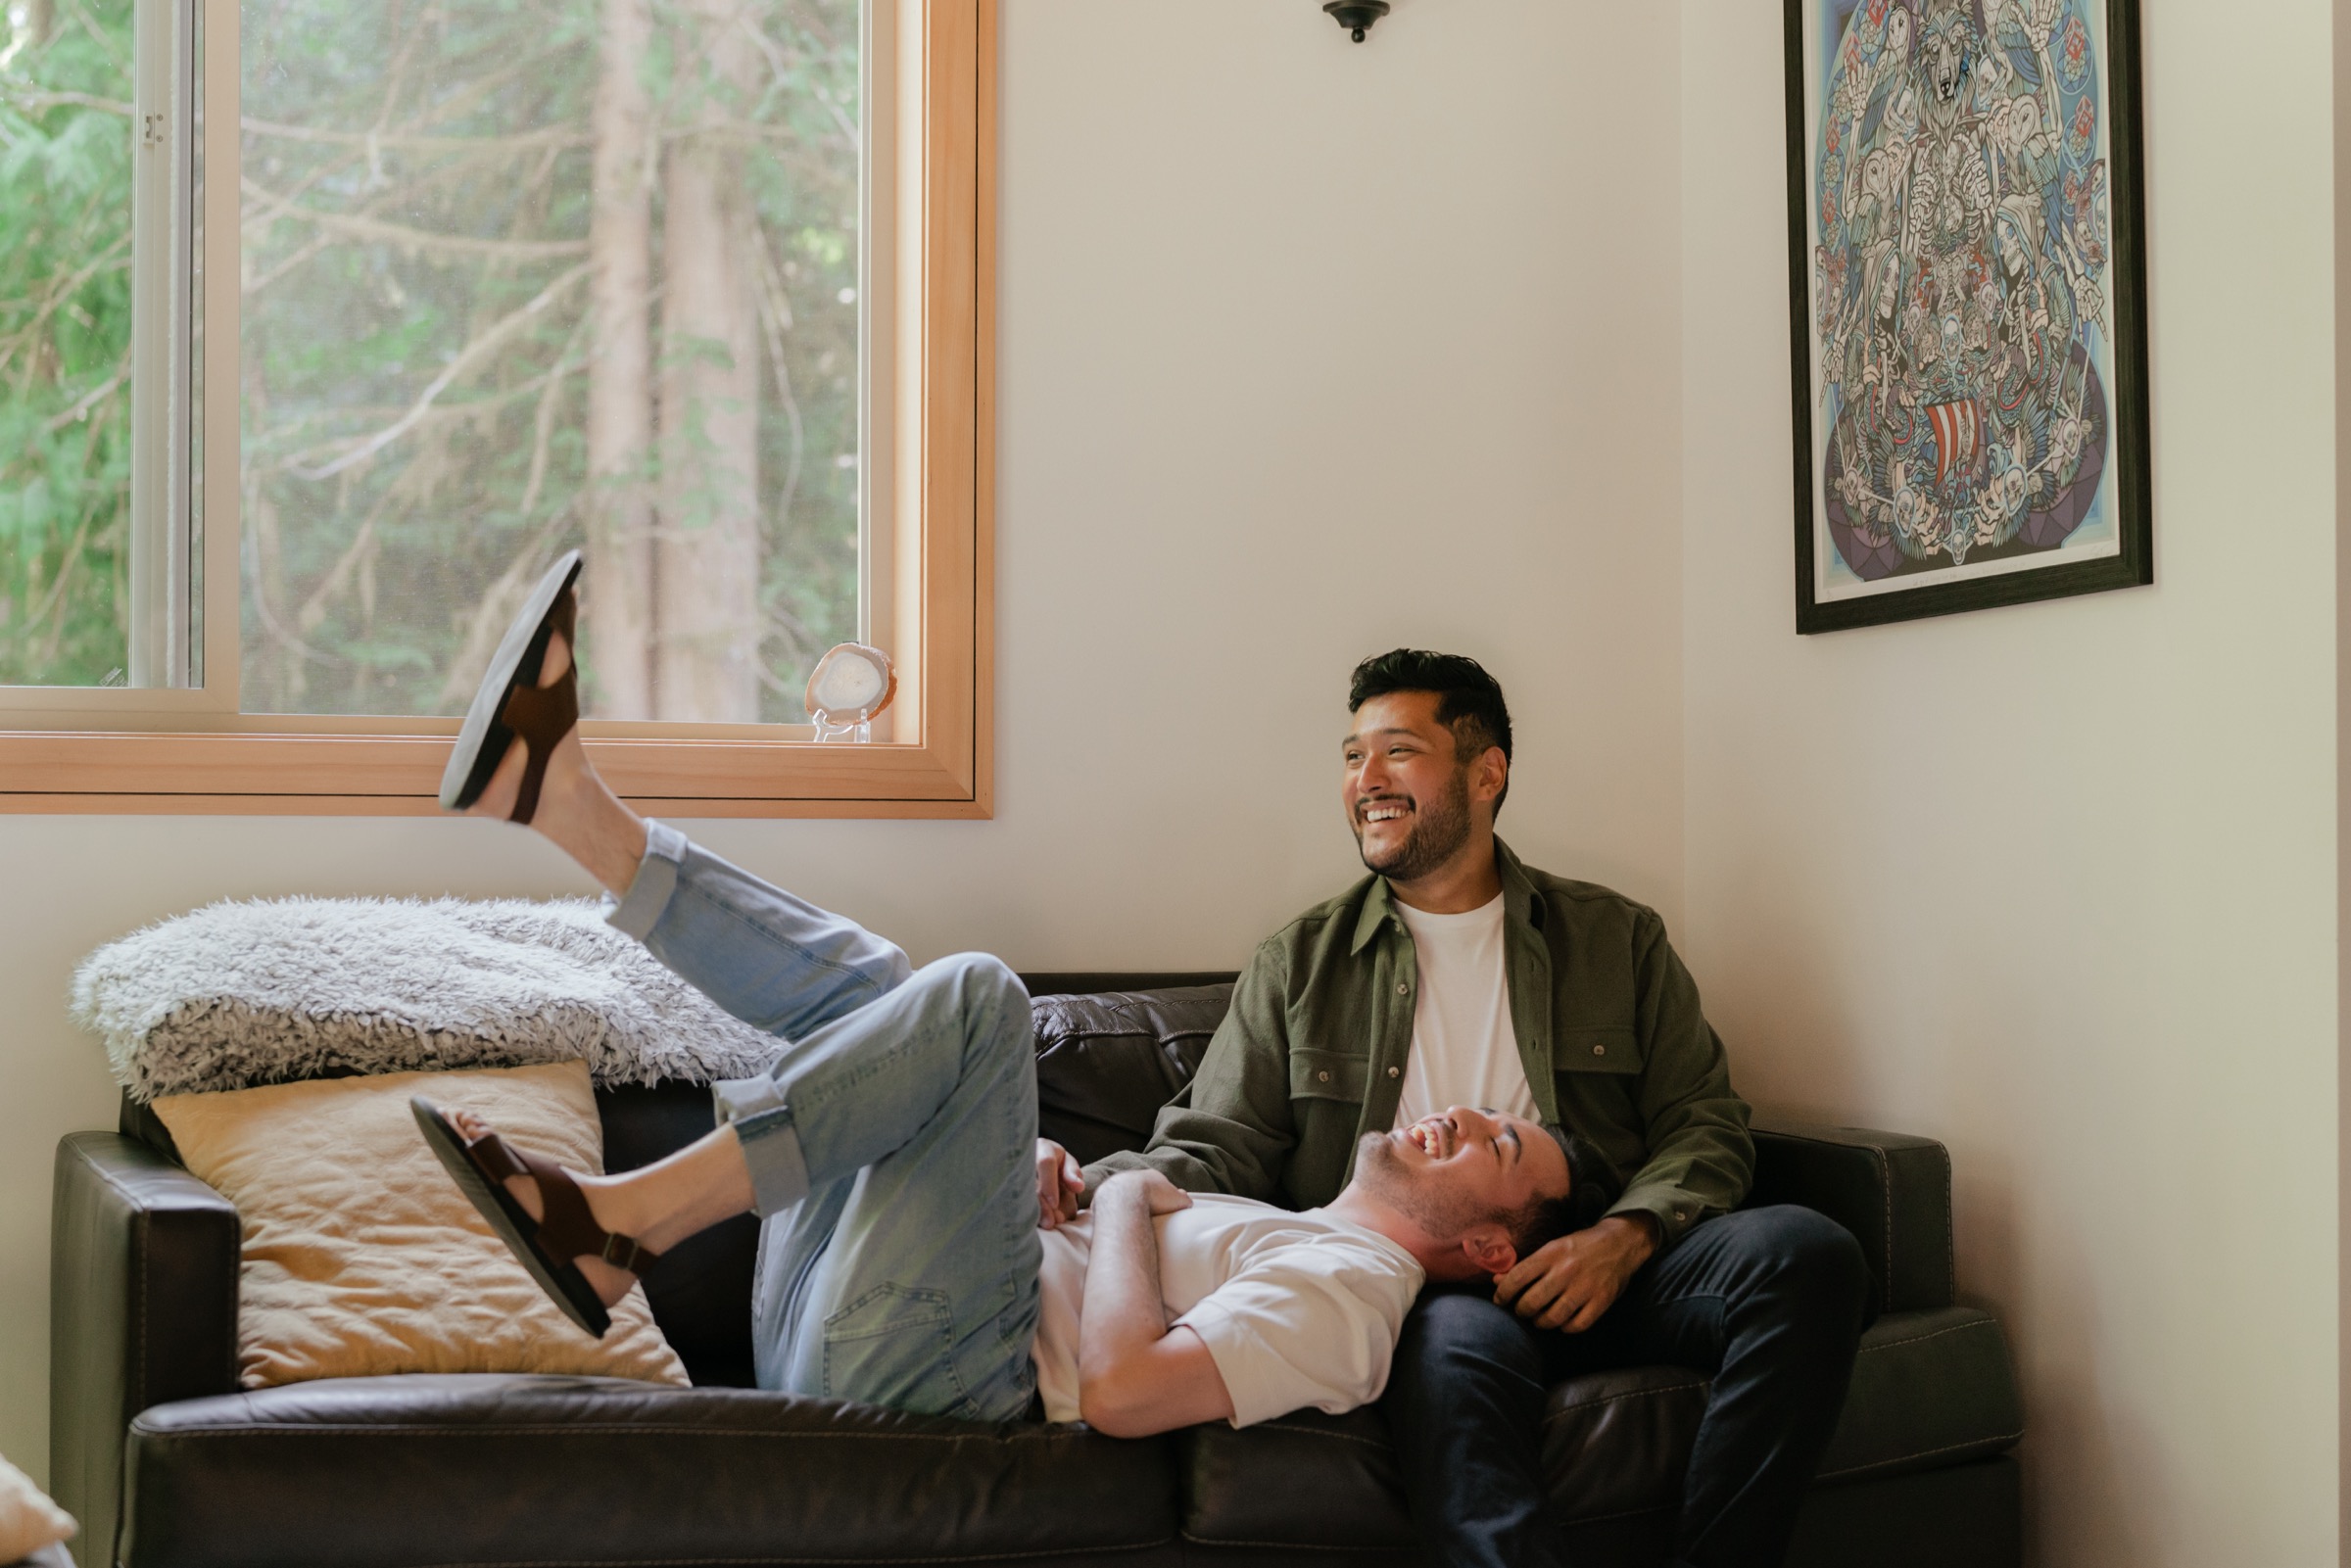 gay-couple-in-home-cabin-session-washington-elopement-photographer